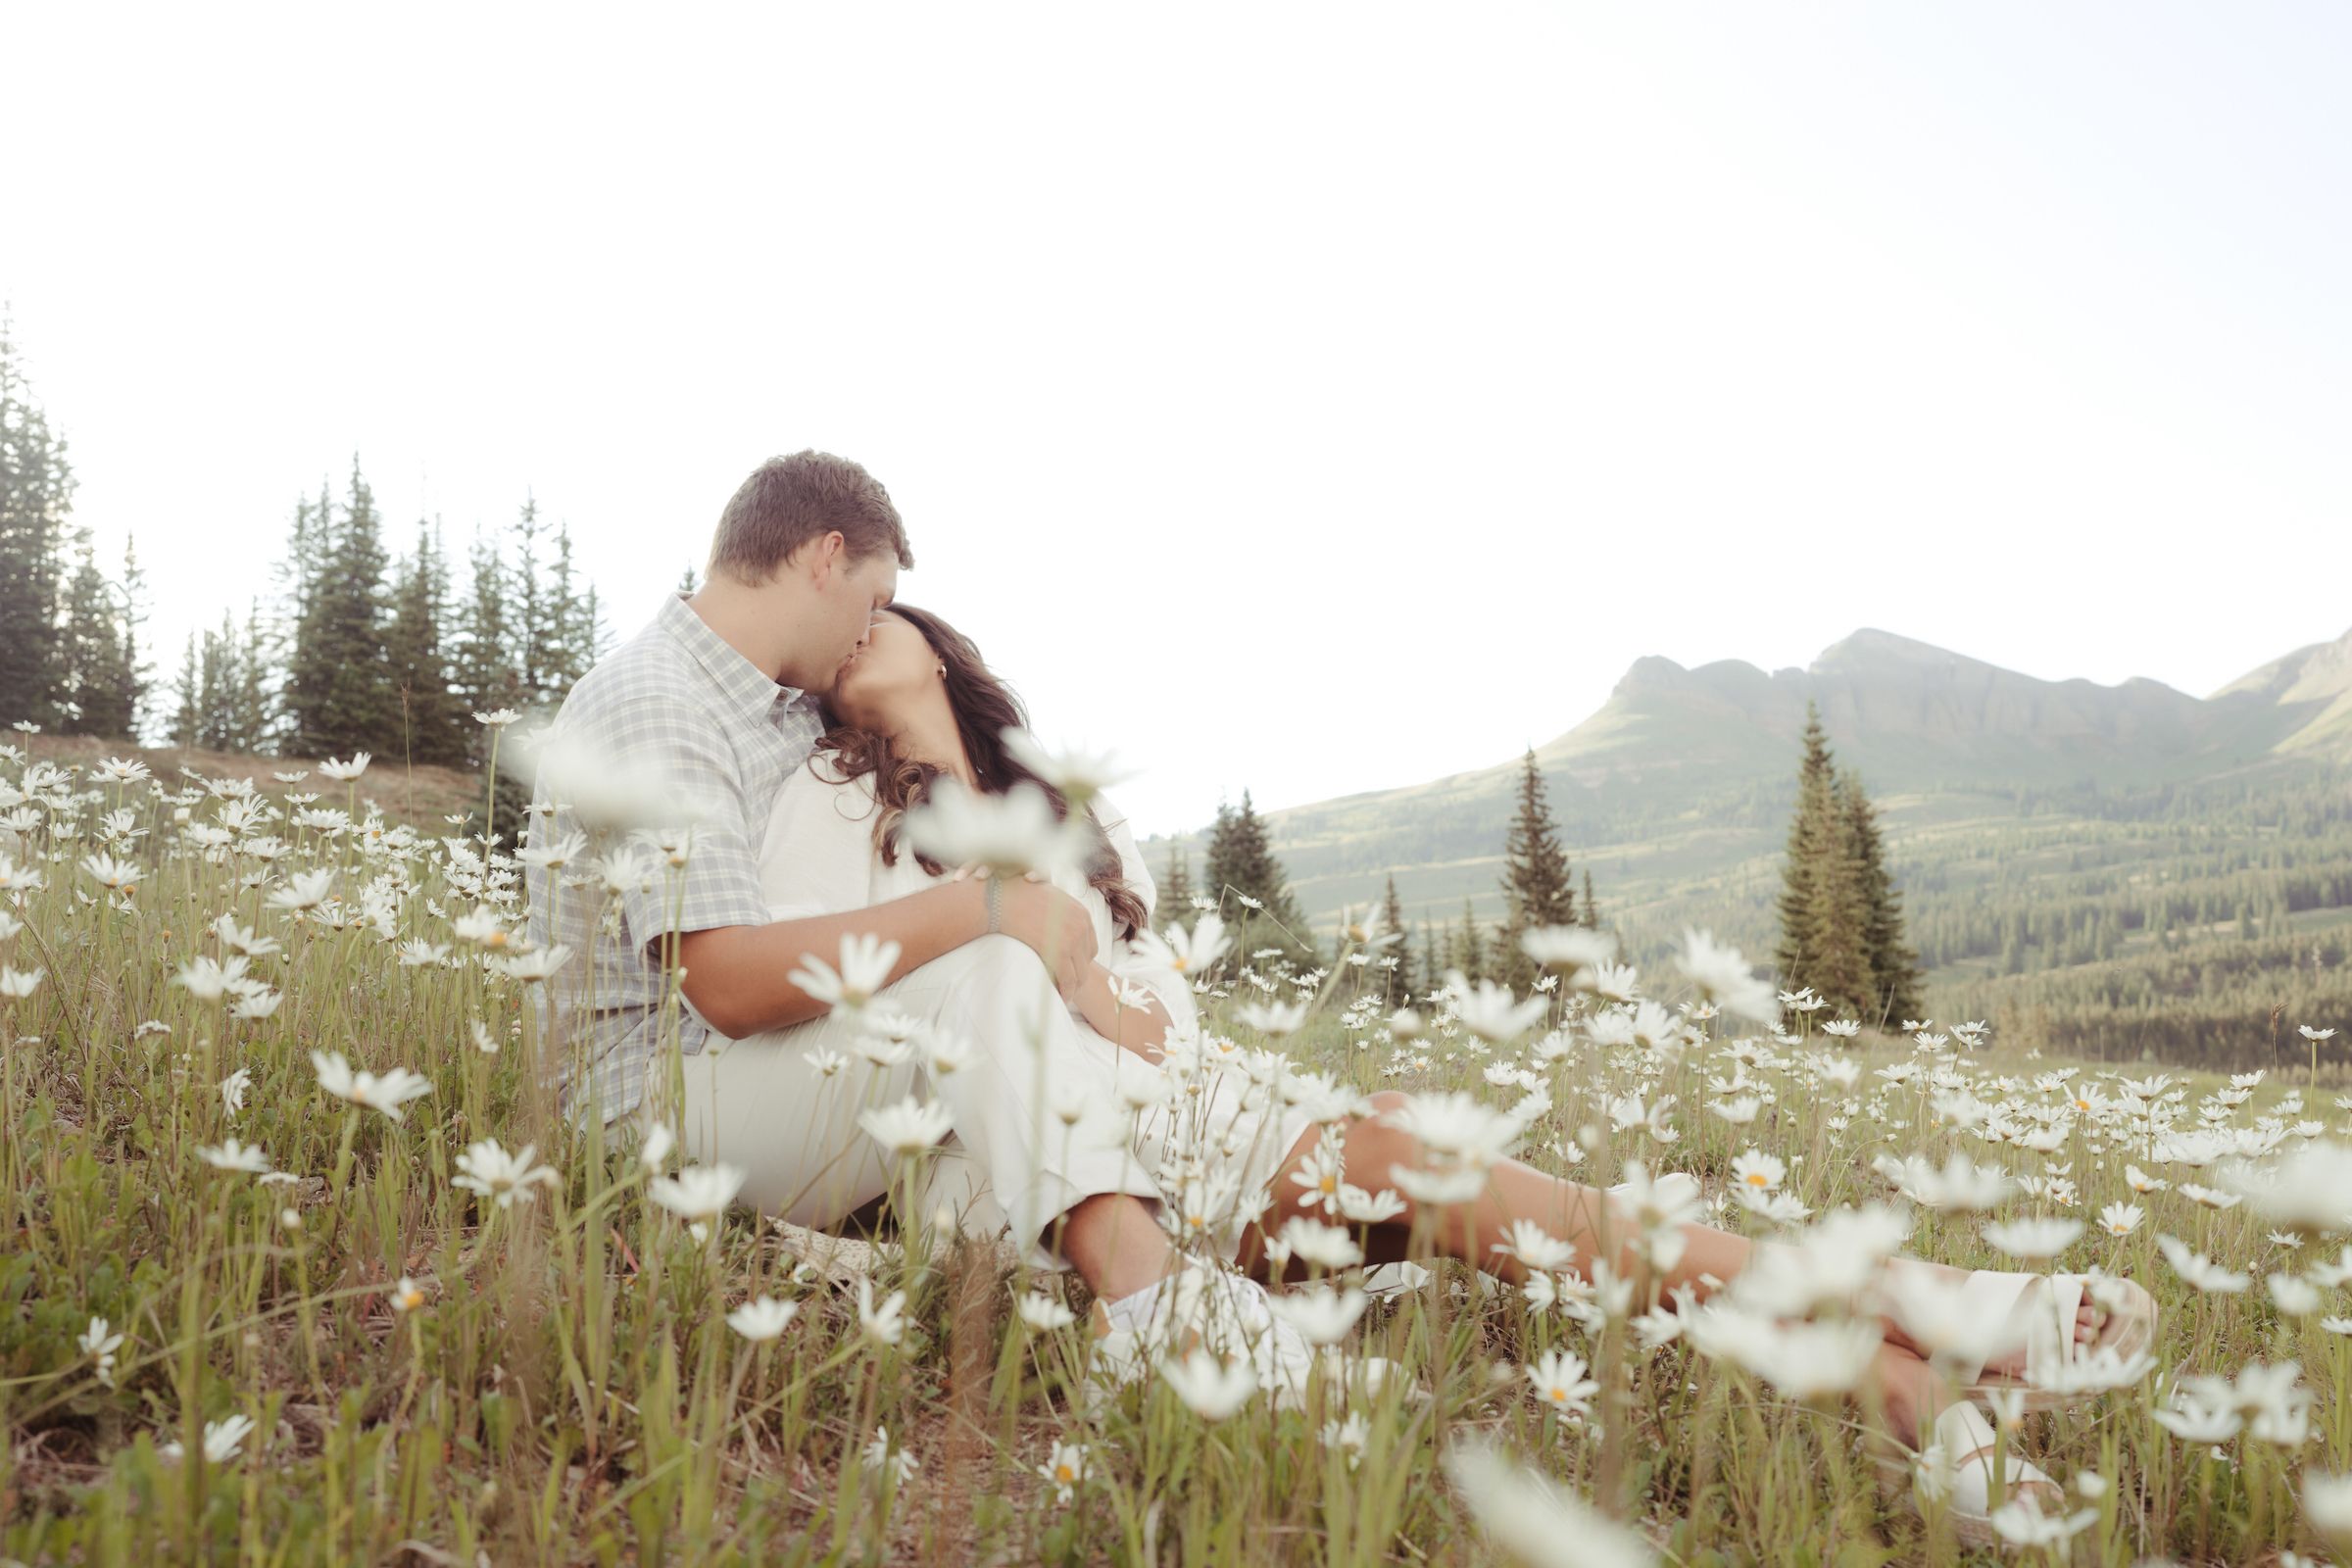 Couple kissing in a field of daisies